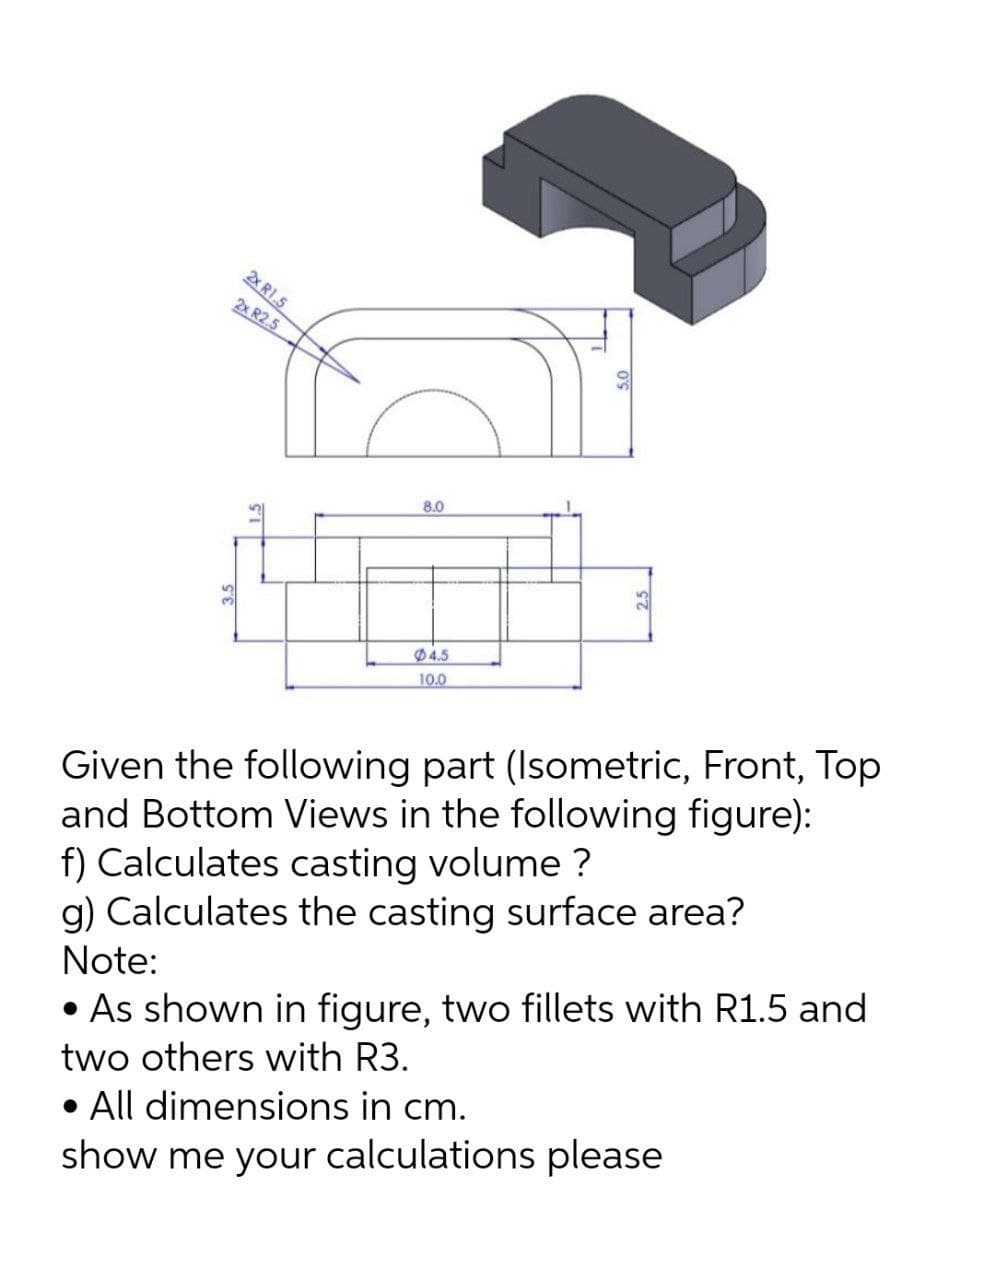 2x R1.5
2x R2.5
8.0
04.5
10.0
Given the following part (Isometric, Front, Top
and Bottom Views in the following figure):
f) Calculates casting volume ?
g) Calculates the casting surface area?
Note:
• As shown in figure, two fillets with R1.5 and
two others with R3.
• All dimensions in cm.
show me your calculations please
